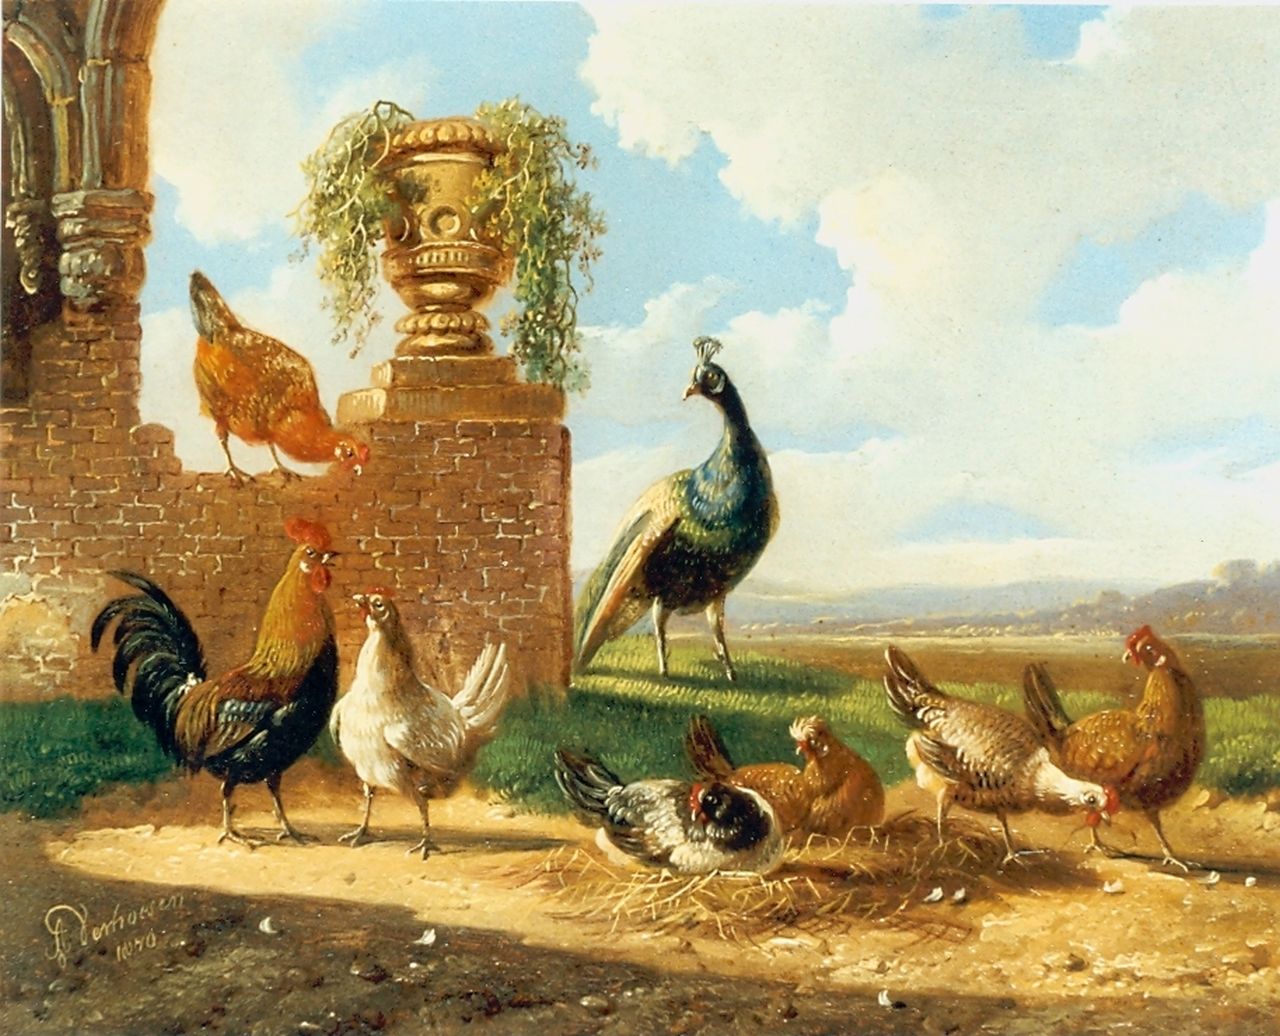 Verhoesen A.  | Albertus Verhoesen, Chickens and a  peacock in a classical landscape, oil on panel 13.5 x 17.2 cm, signed l.l. and dated 1870